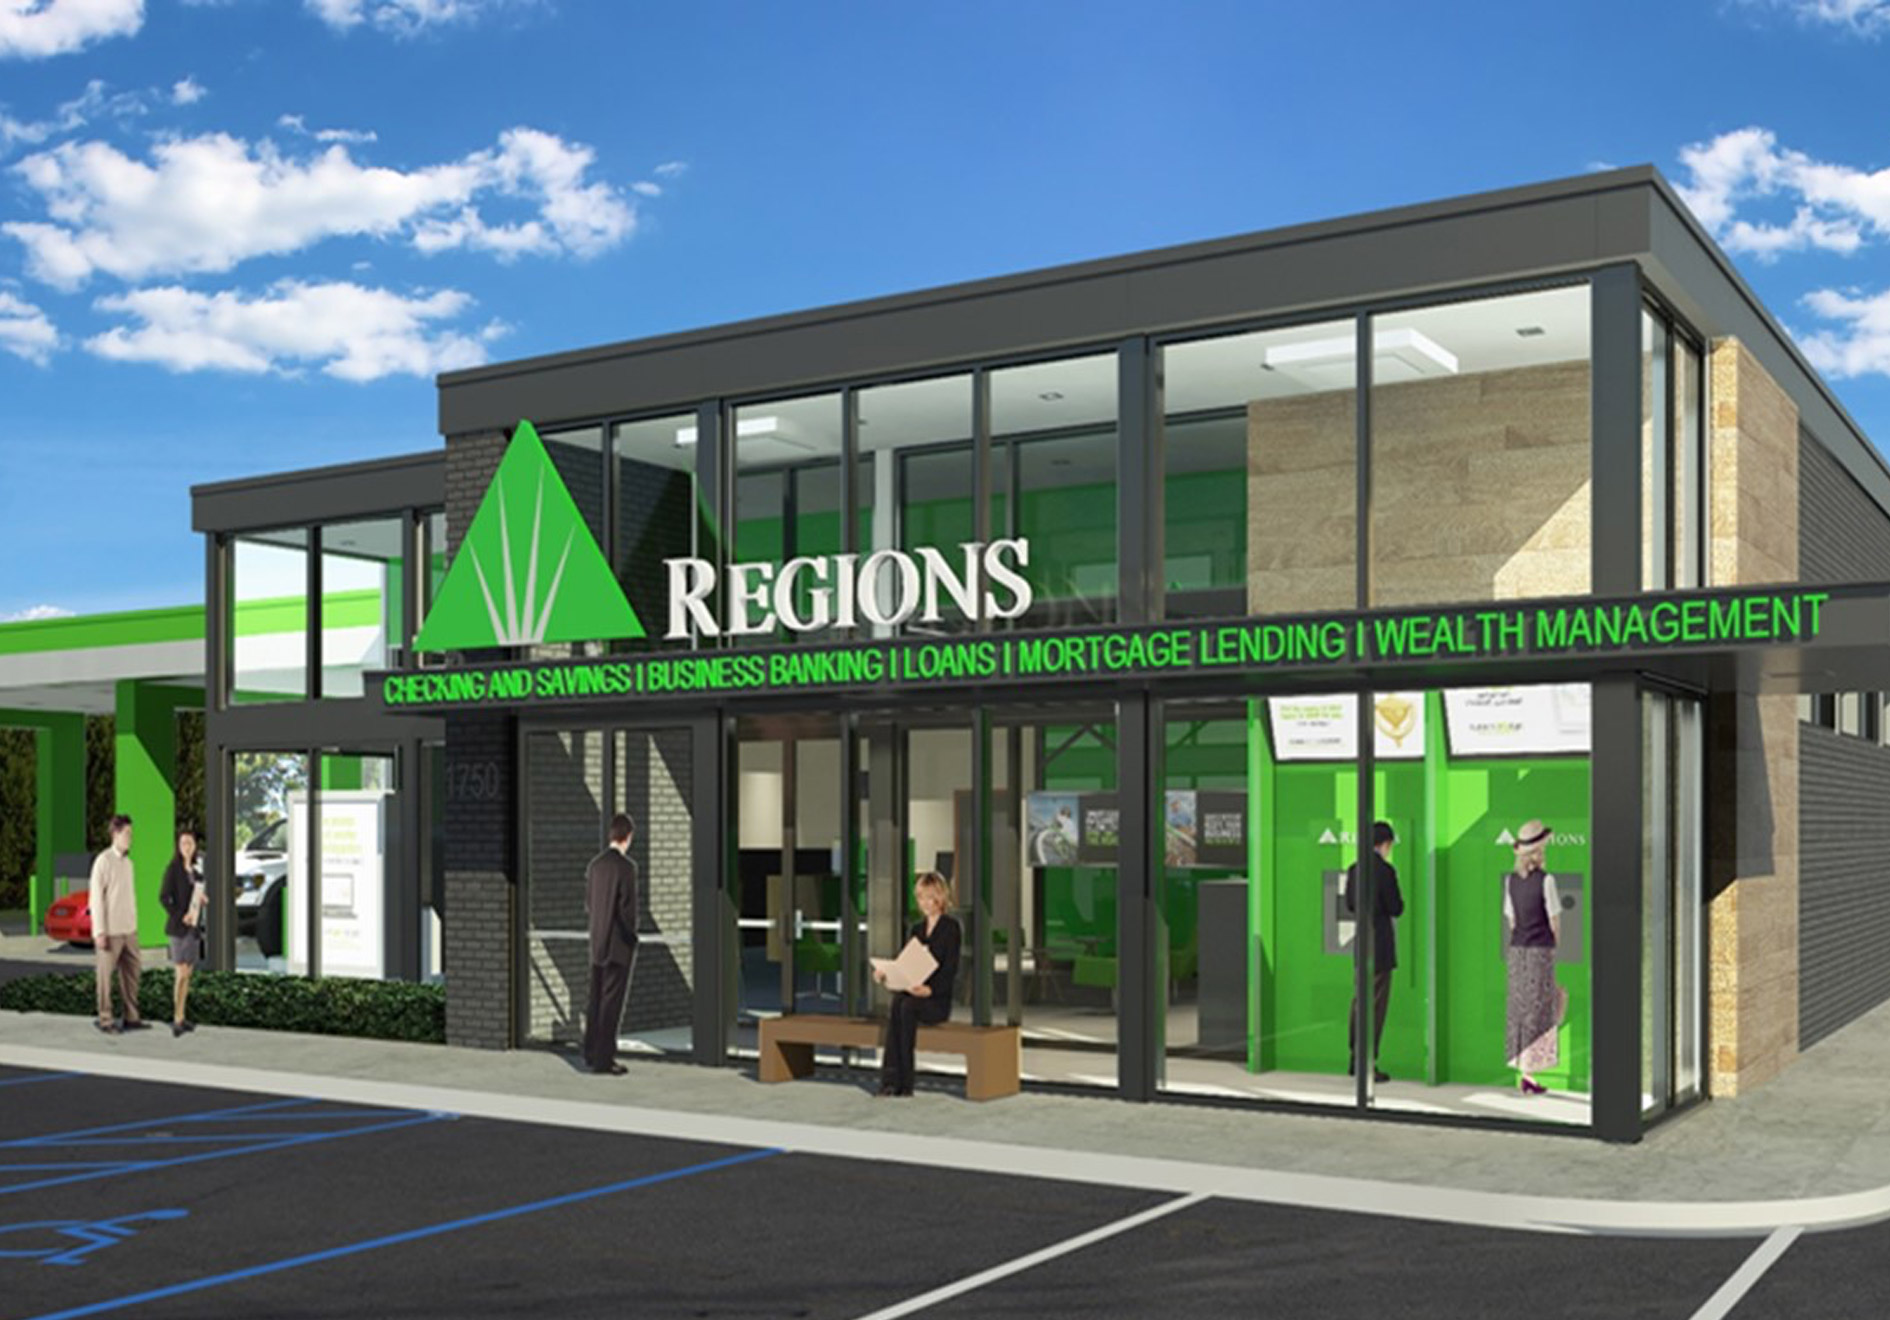 Regions Bank Location in Arnold, Mo.